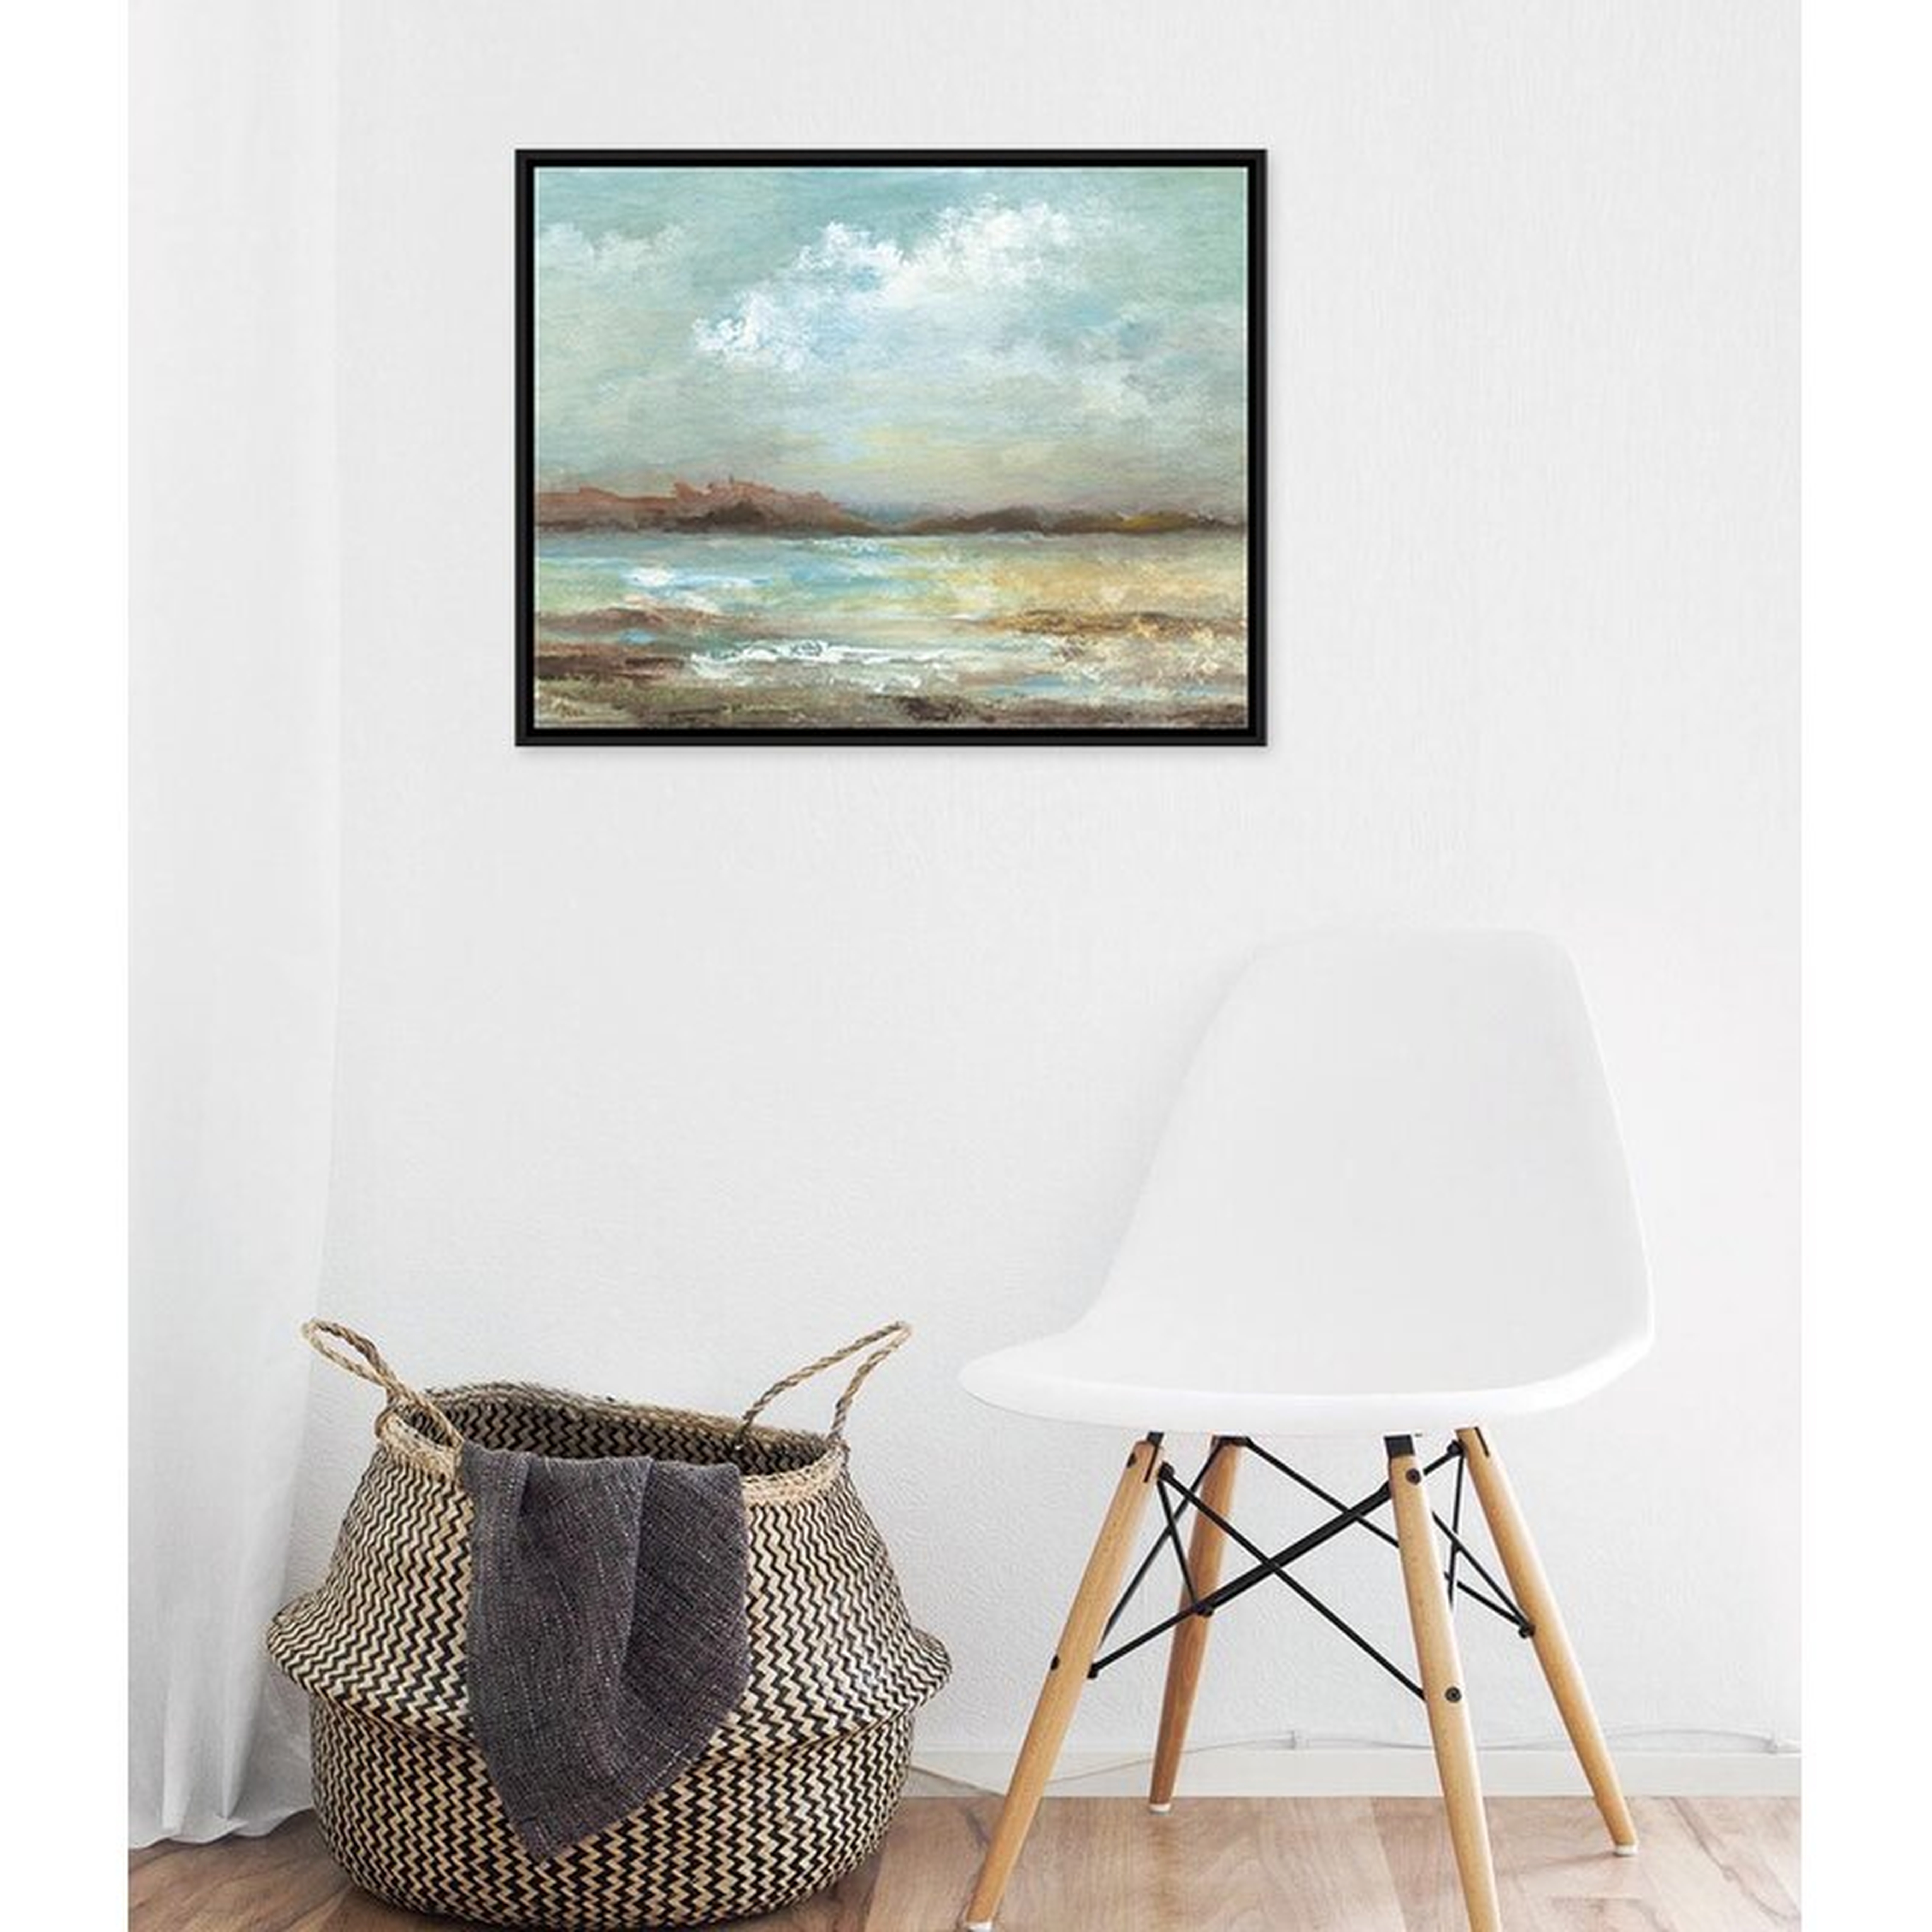 JBass Grand Gallery Collection Ocean Breeze II - Framed on Canvas - Perigold